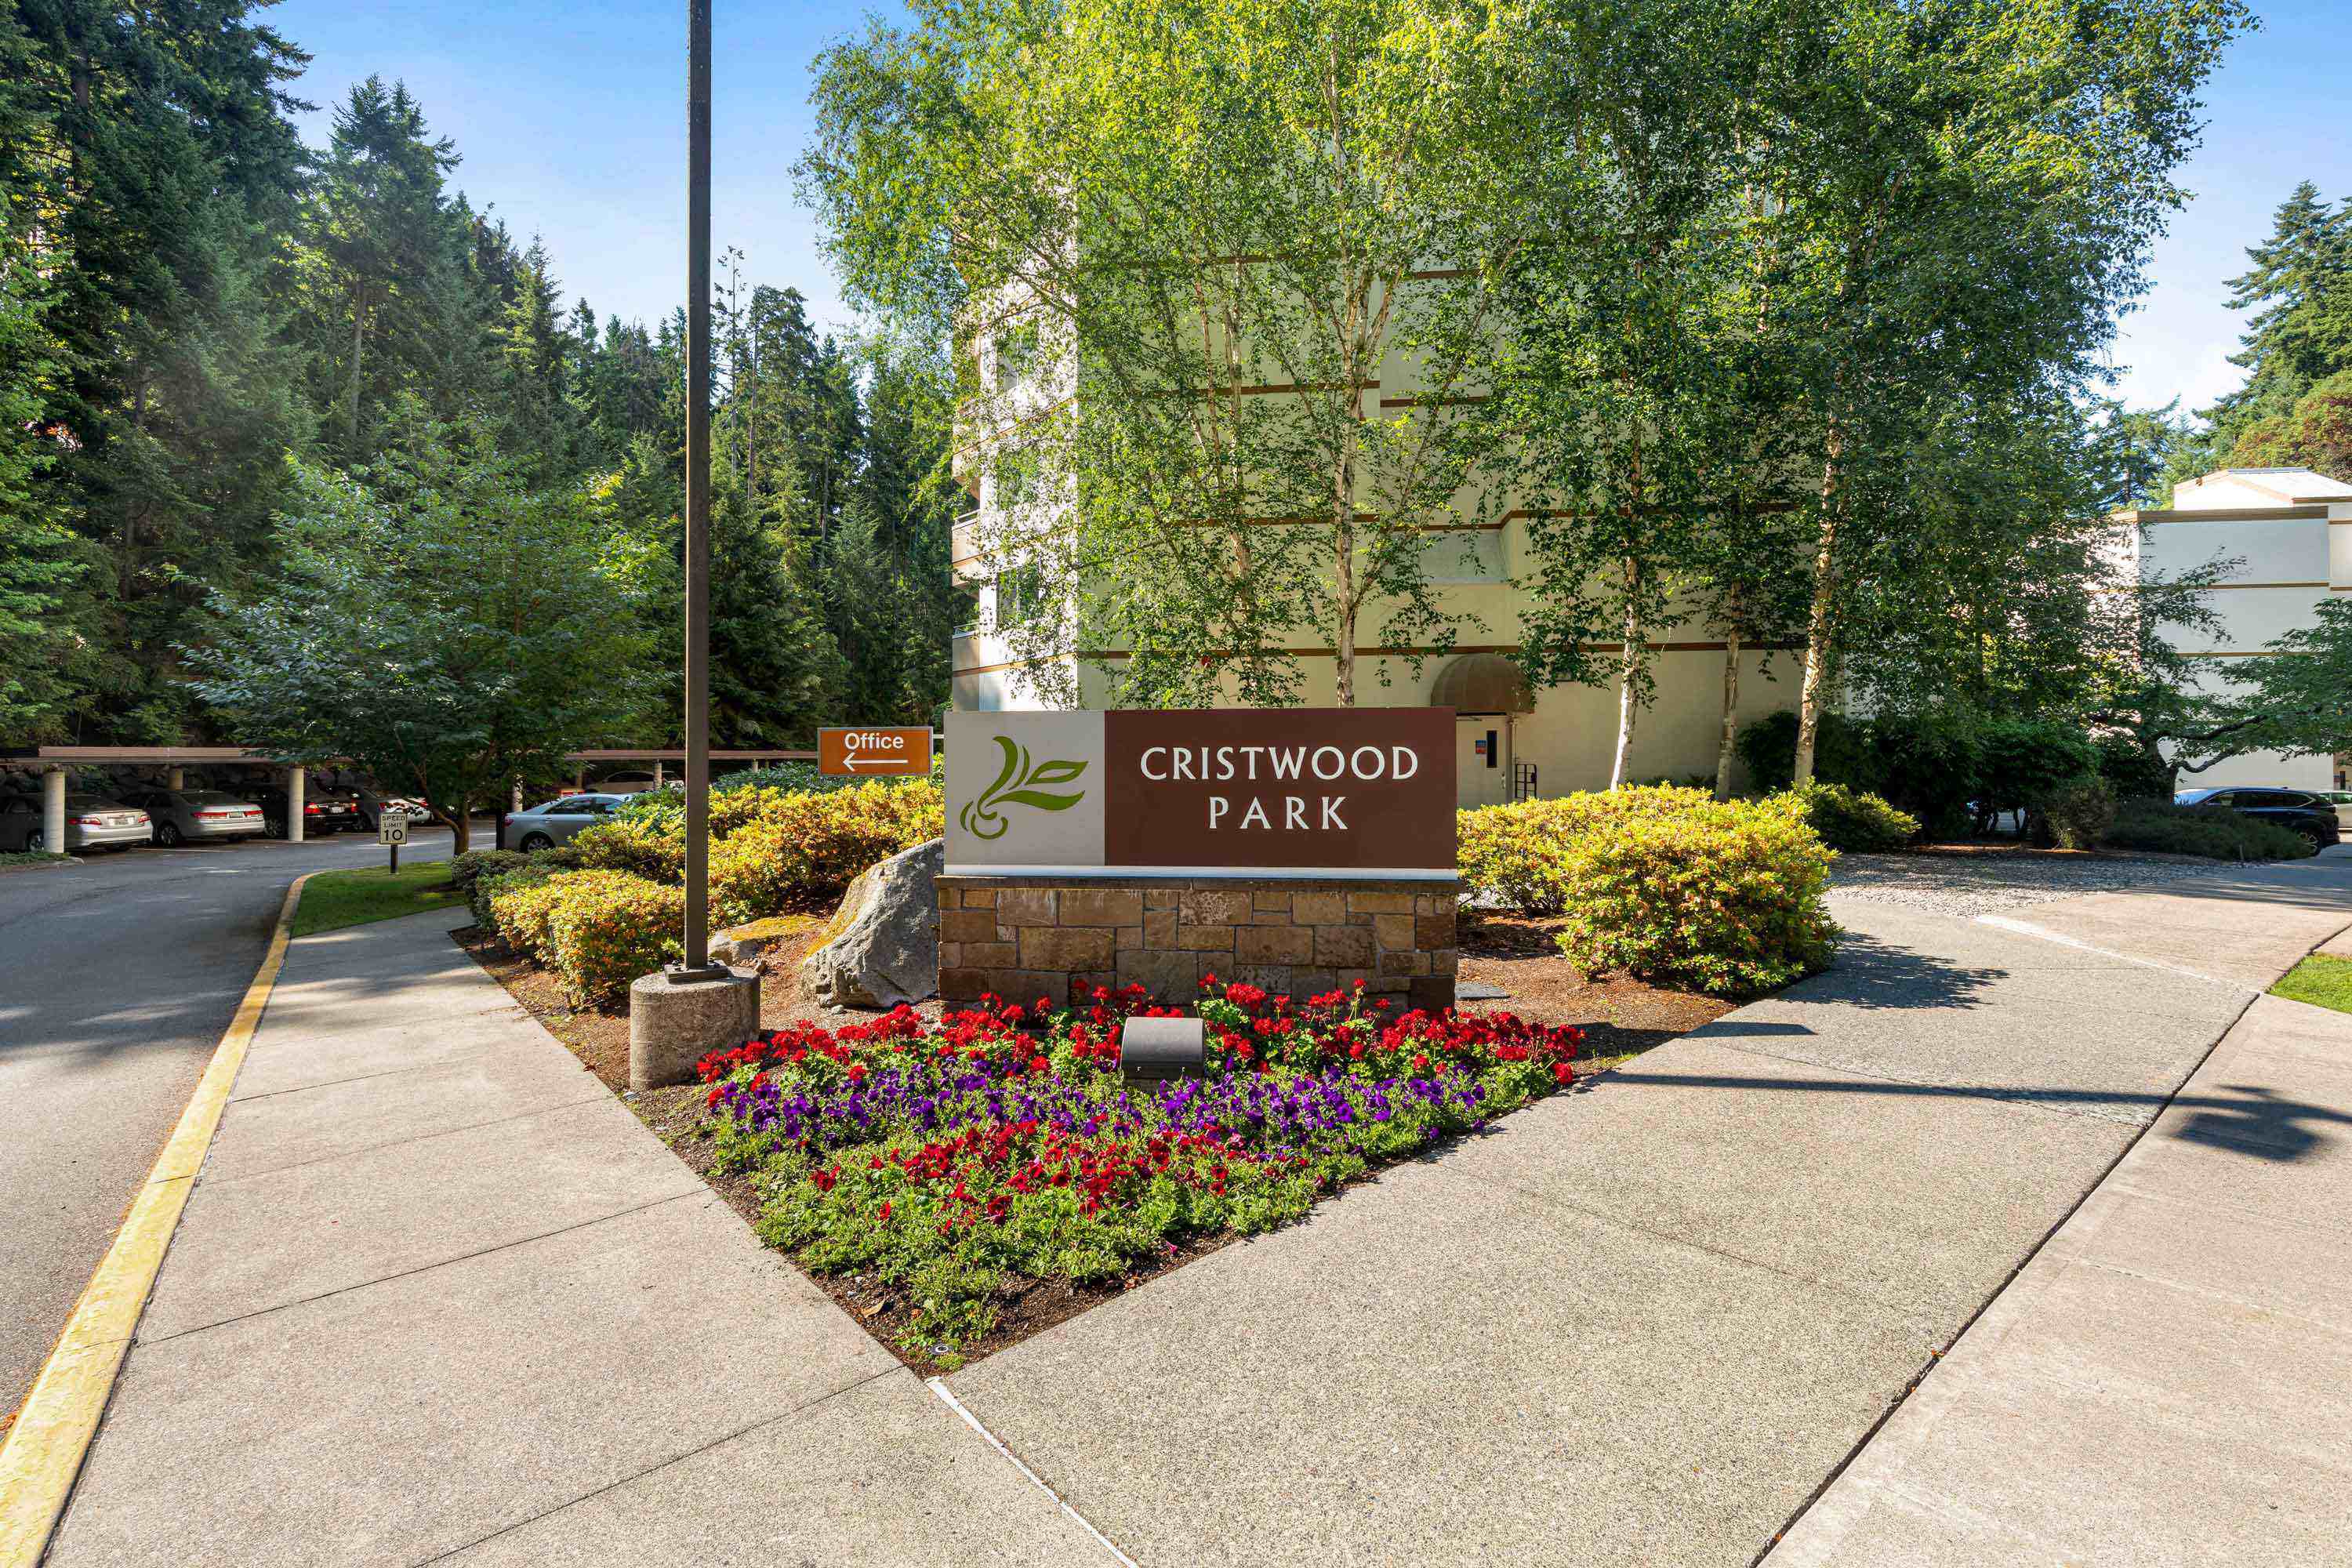 Cristwood Park and The Courtyard image